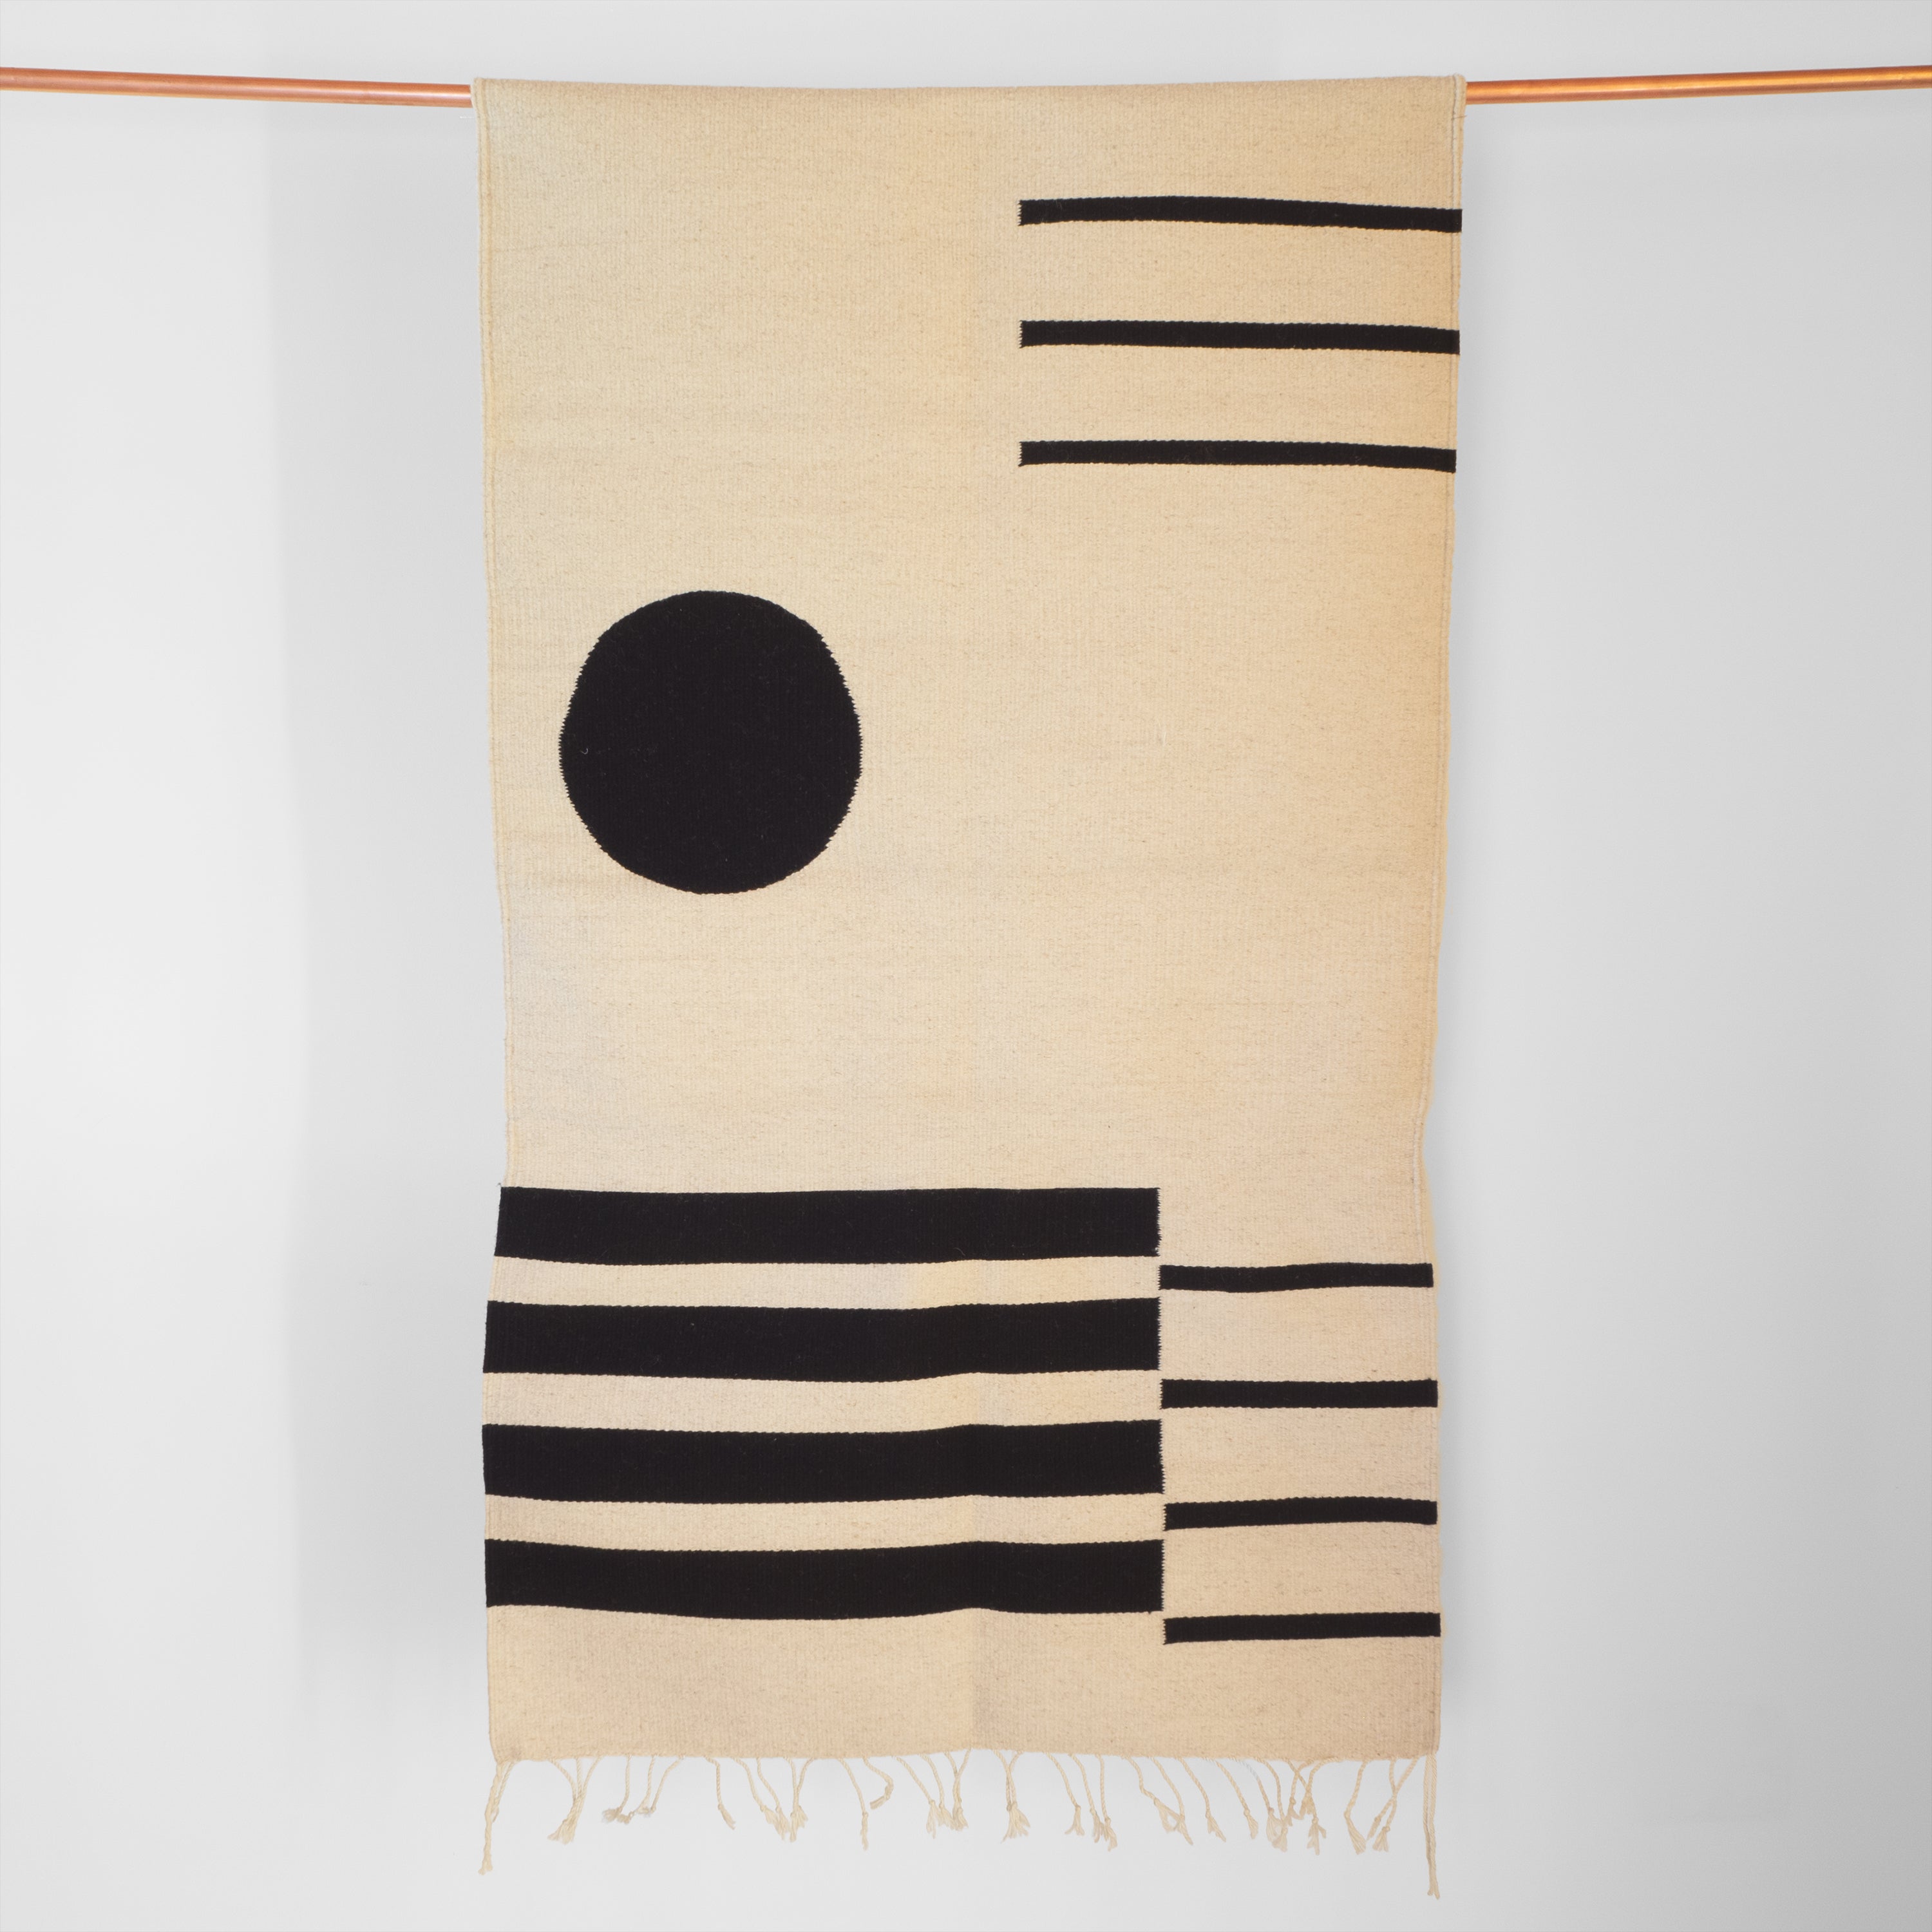 Handwoven cream and black sheep's wool accent rug from women's cooperative in Mexico hanging on copper pipe